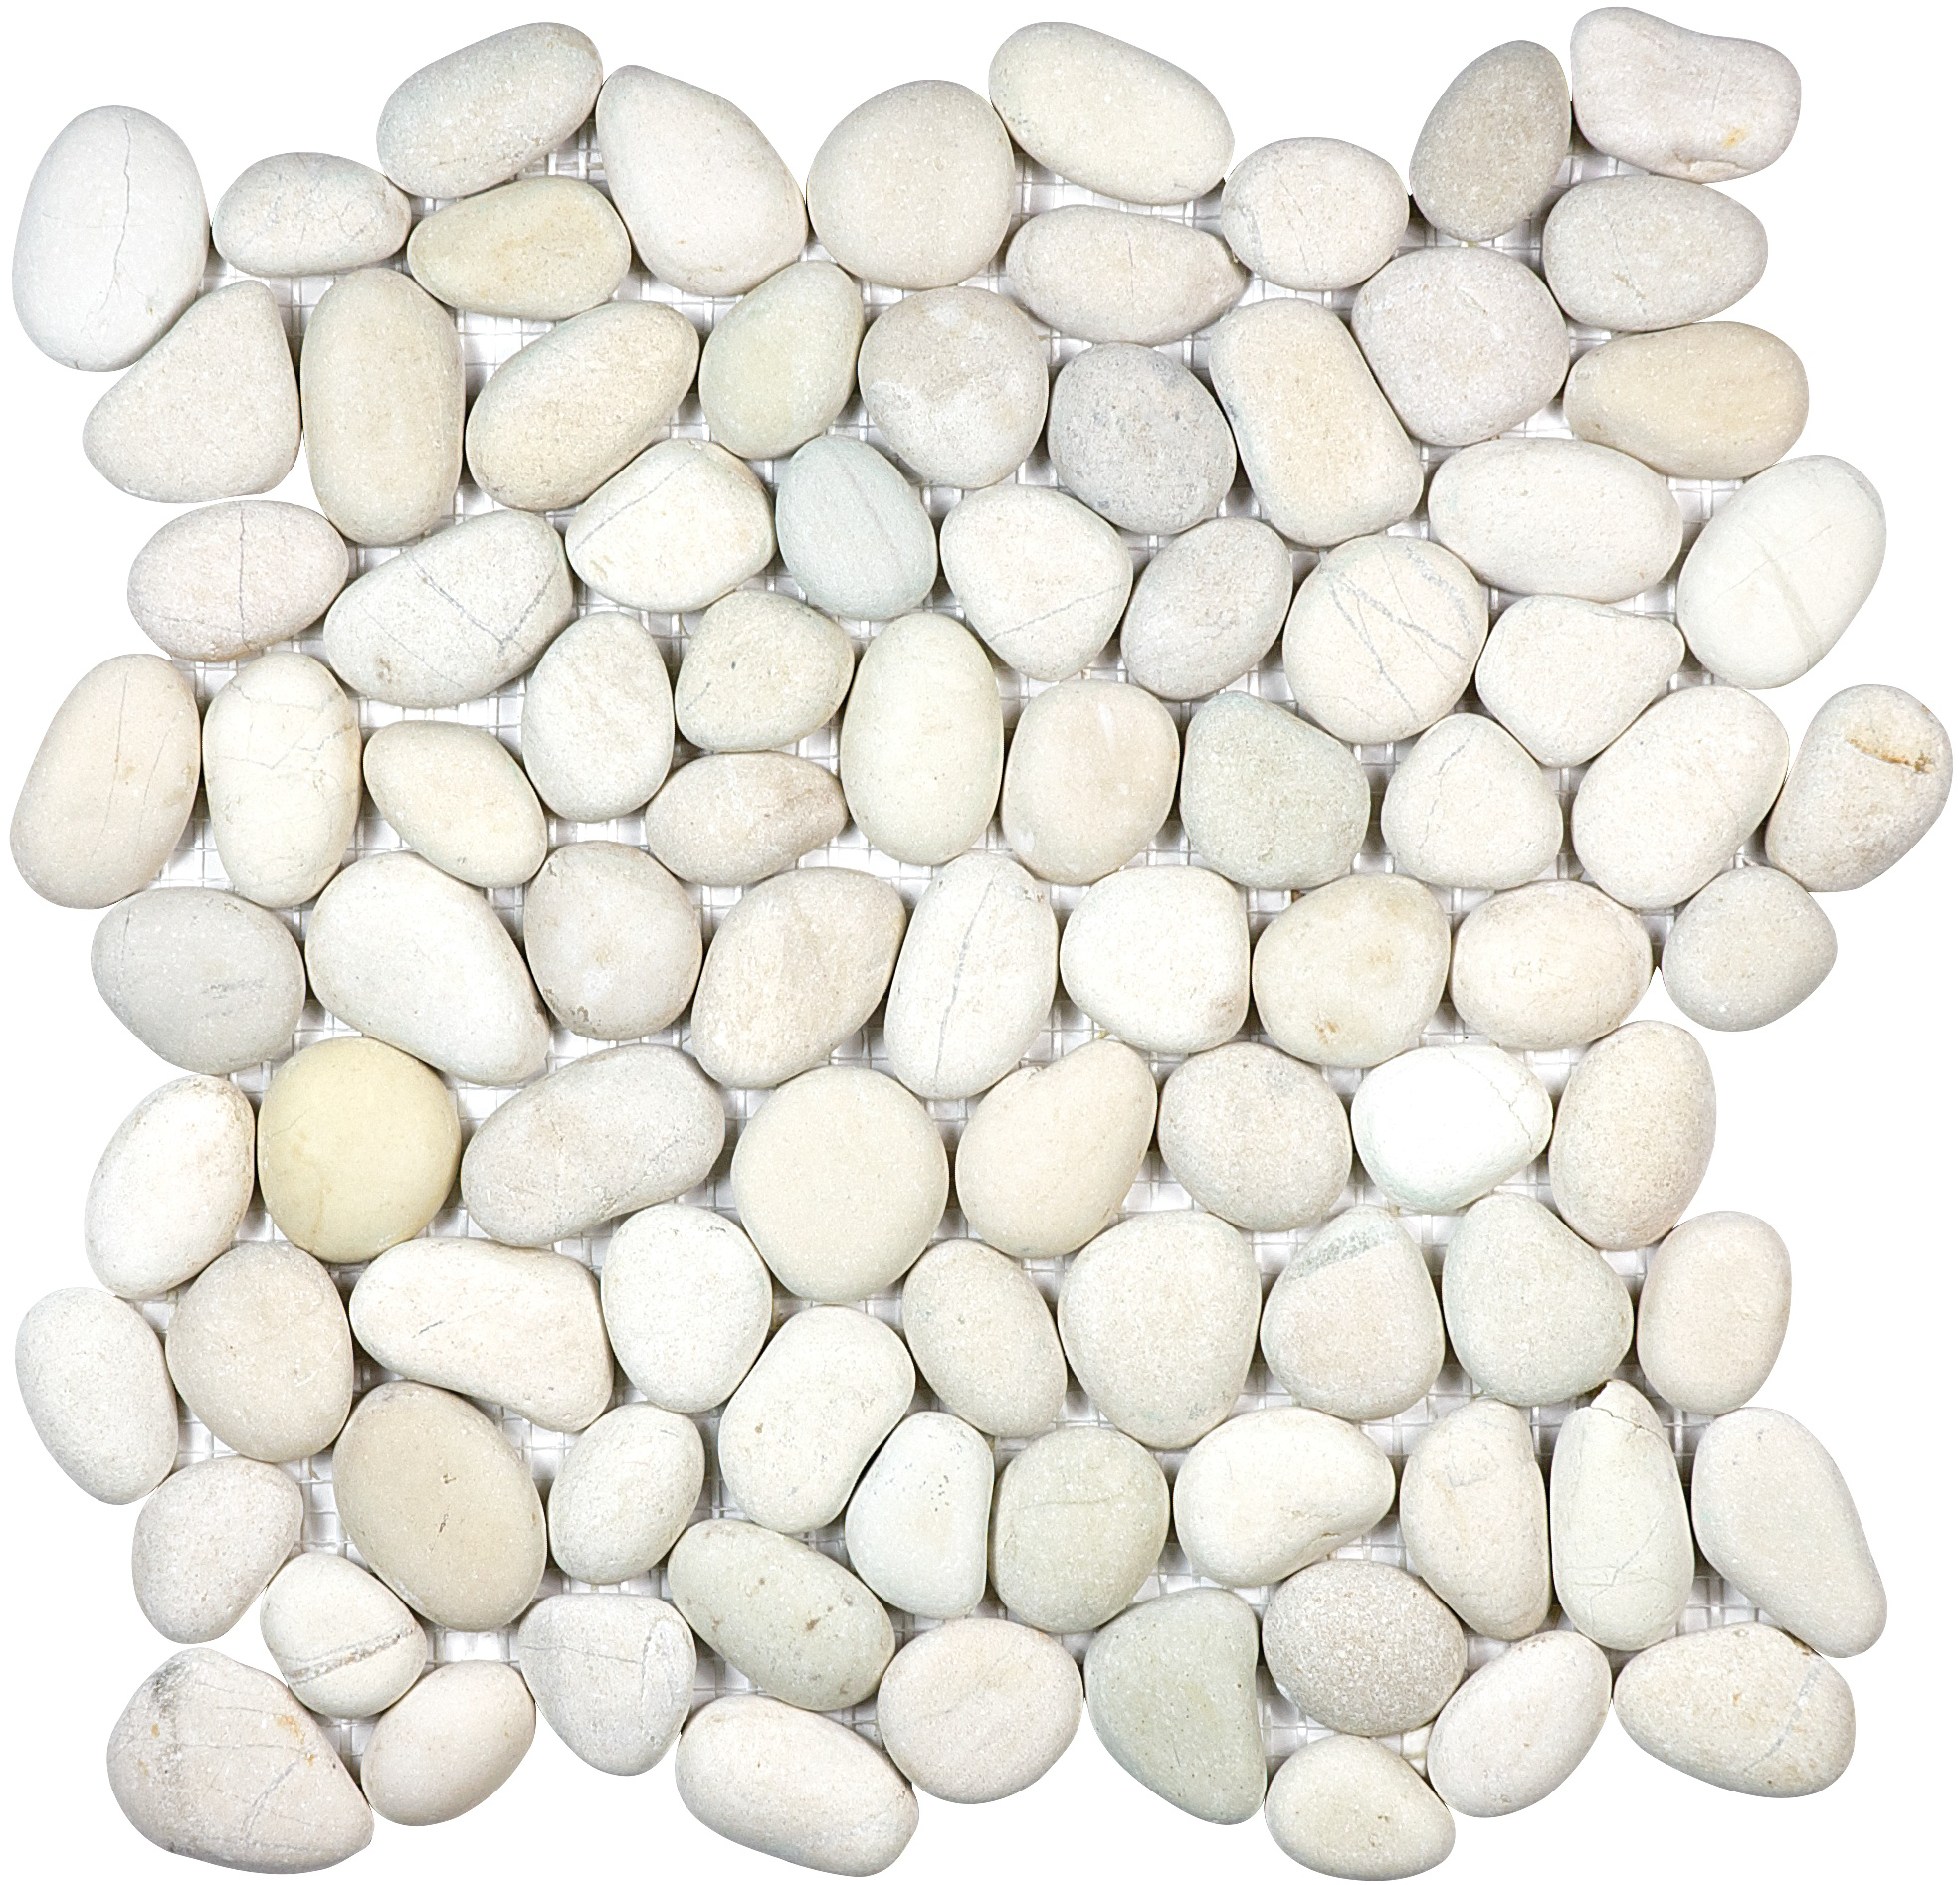 pebble serenity ivory natural pebble pattern natural stone mosaic from zen anatolia collection distributed by surface group international matte finish straight edge edge mesh shape